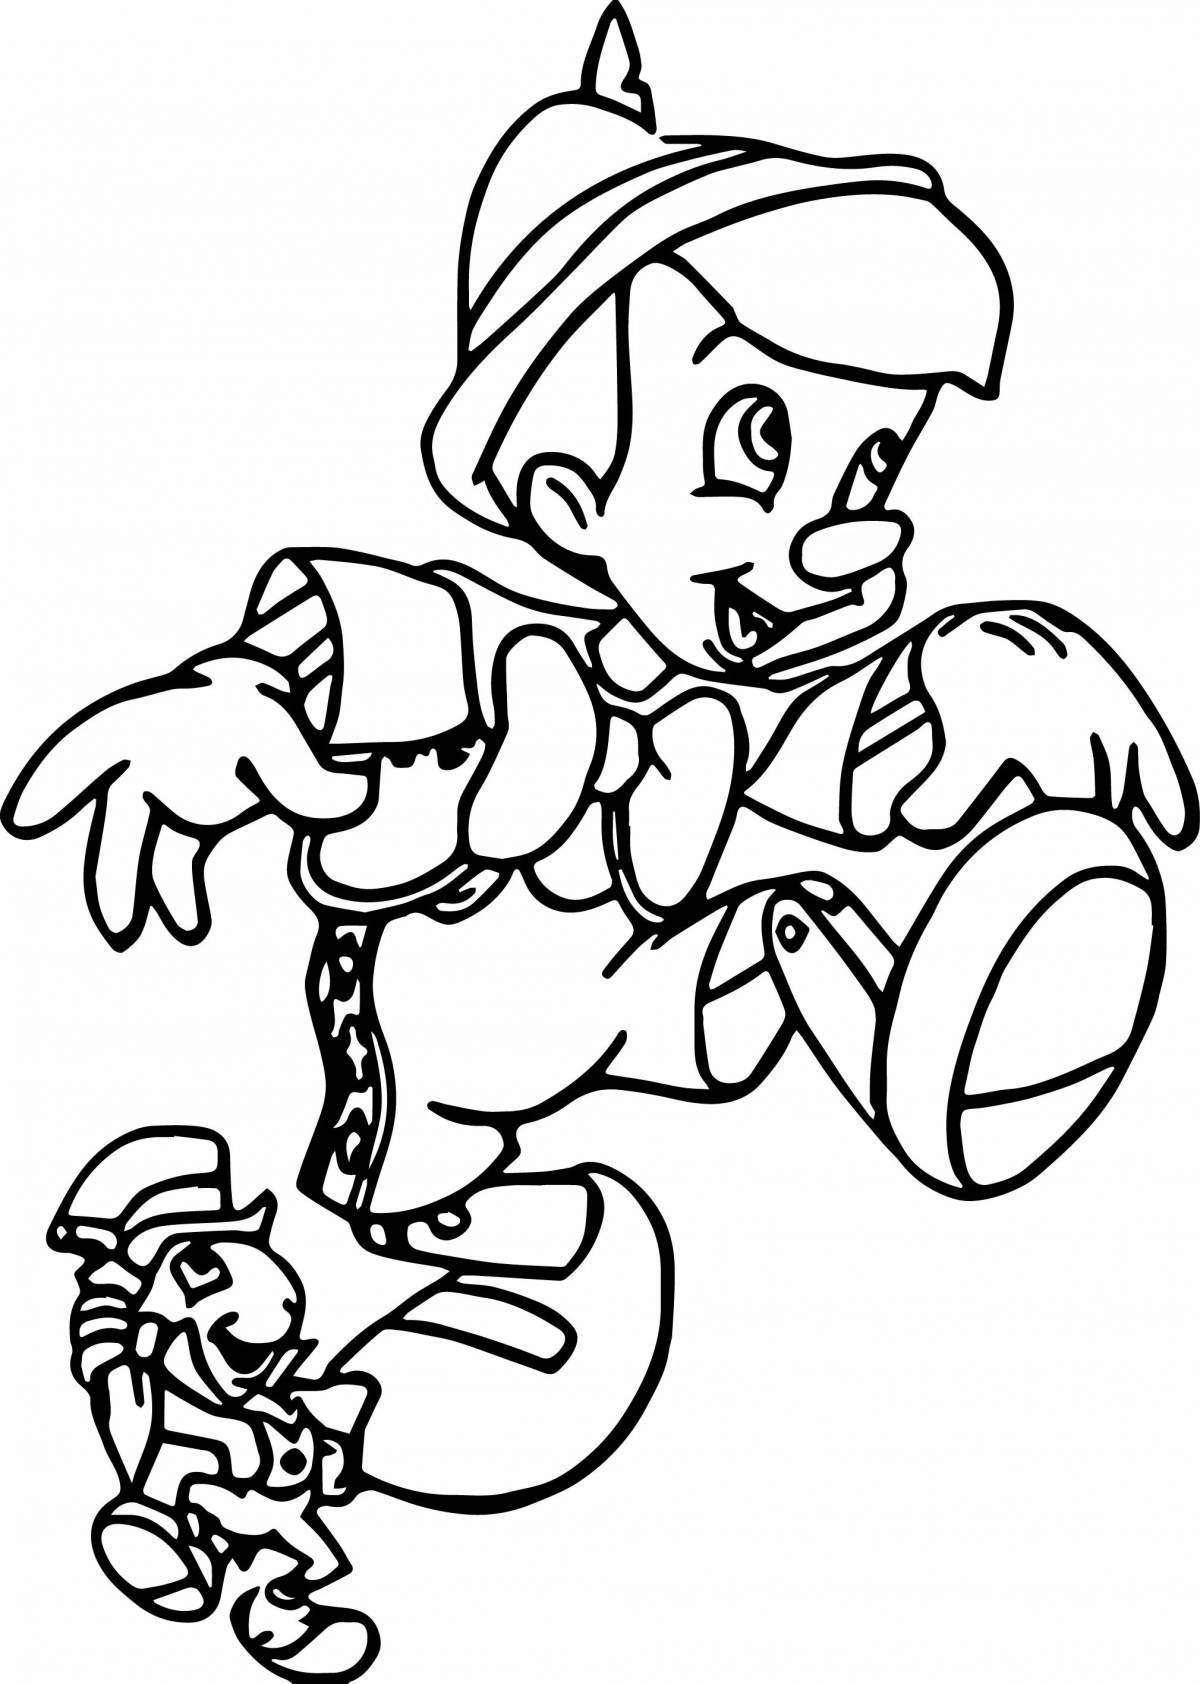 Attractive Pinocchio coloring book for kids